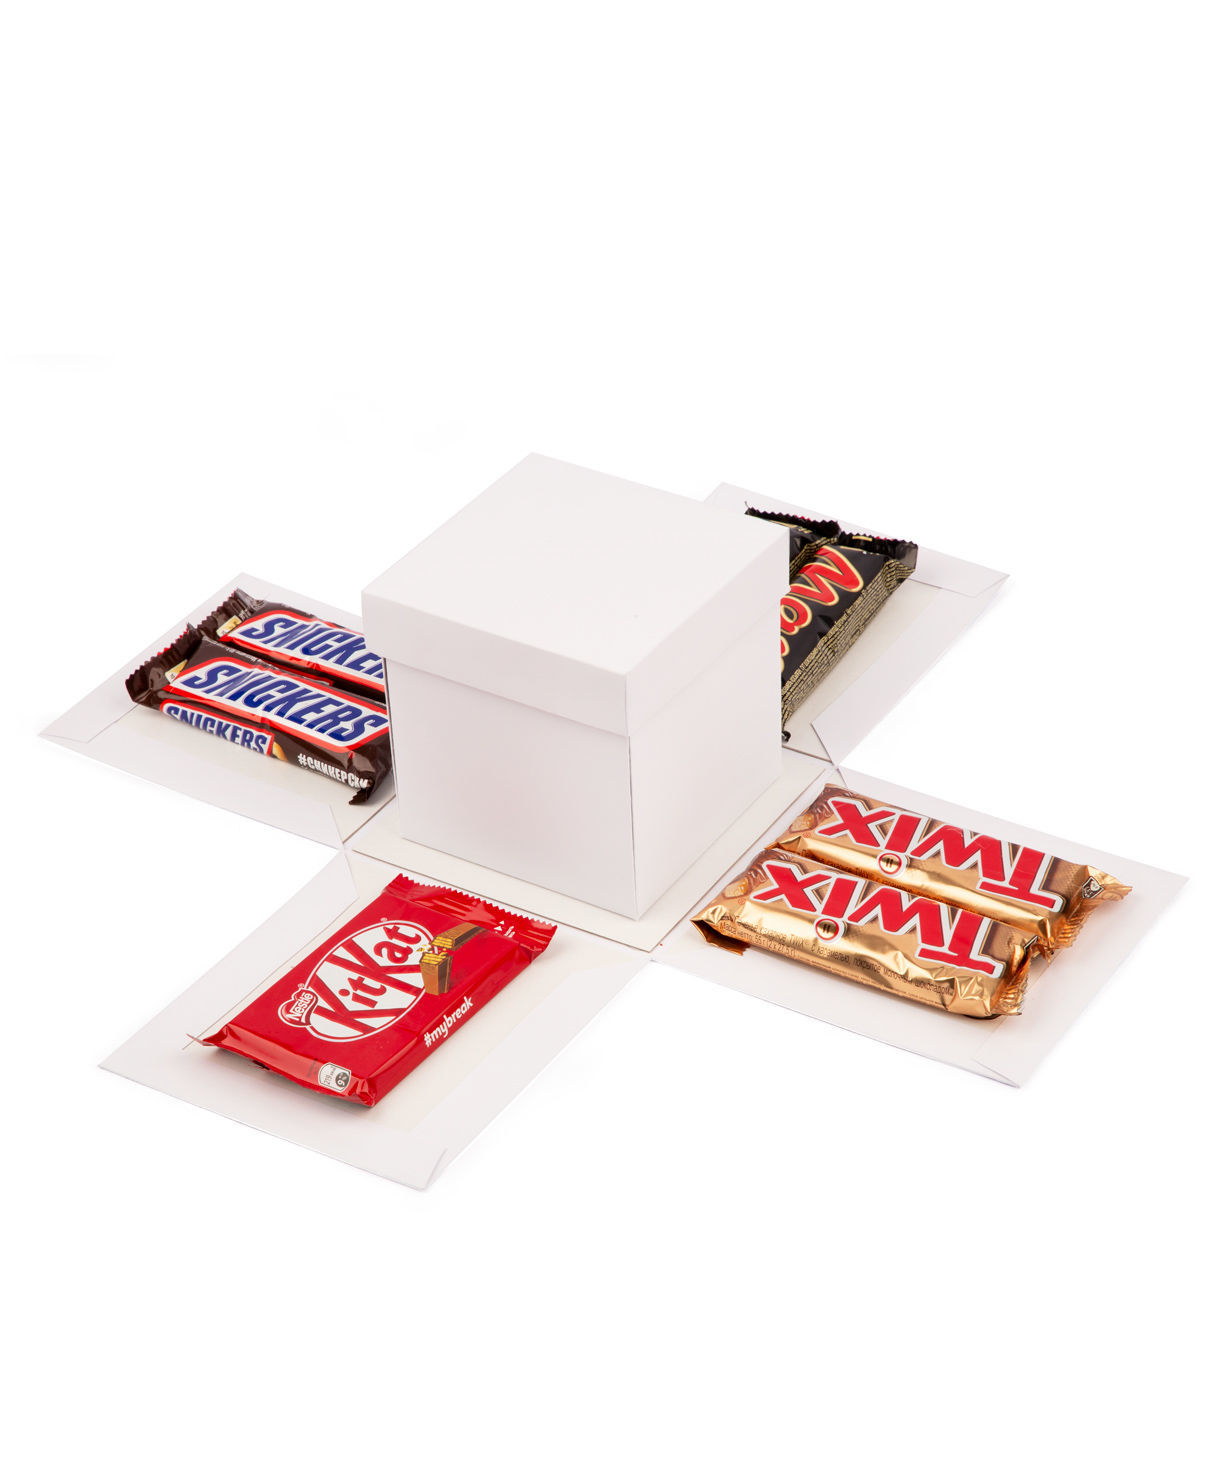 Gift Boxes With Lids 4 Surprise Gift Box Explosion And 4 - Temu United Arab  Emirates